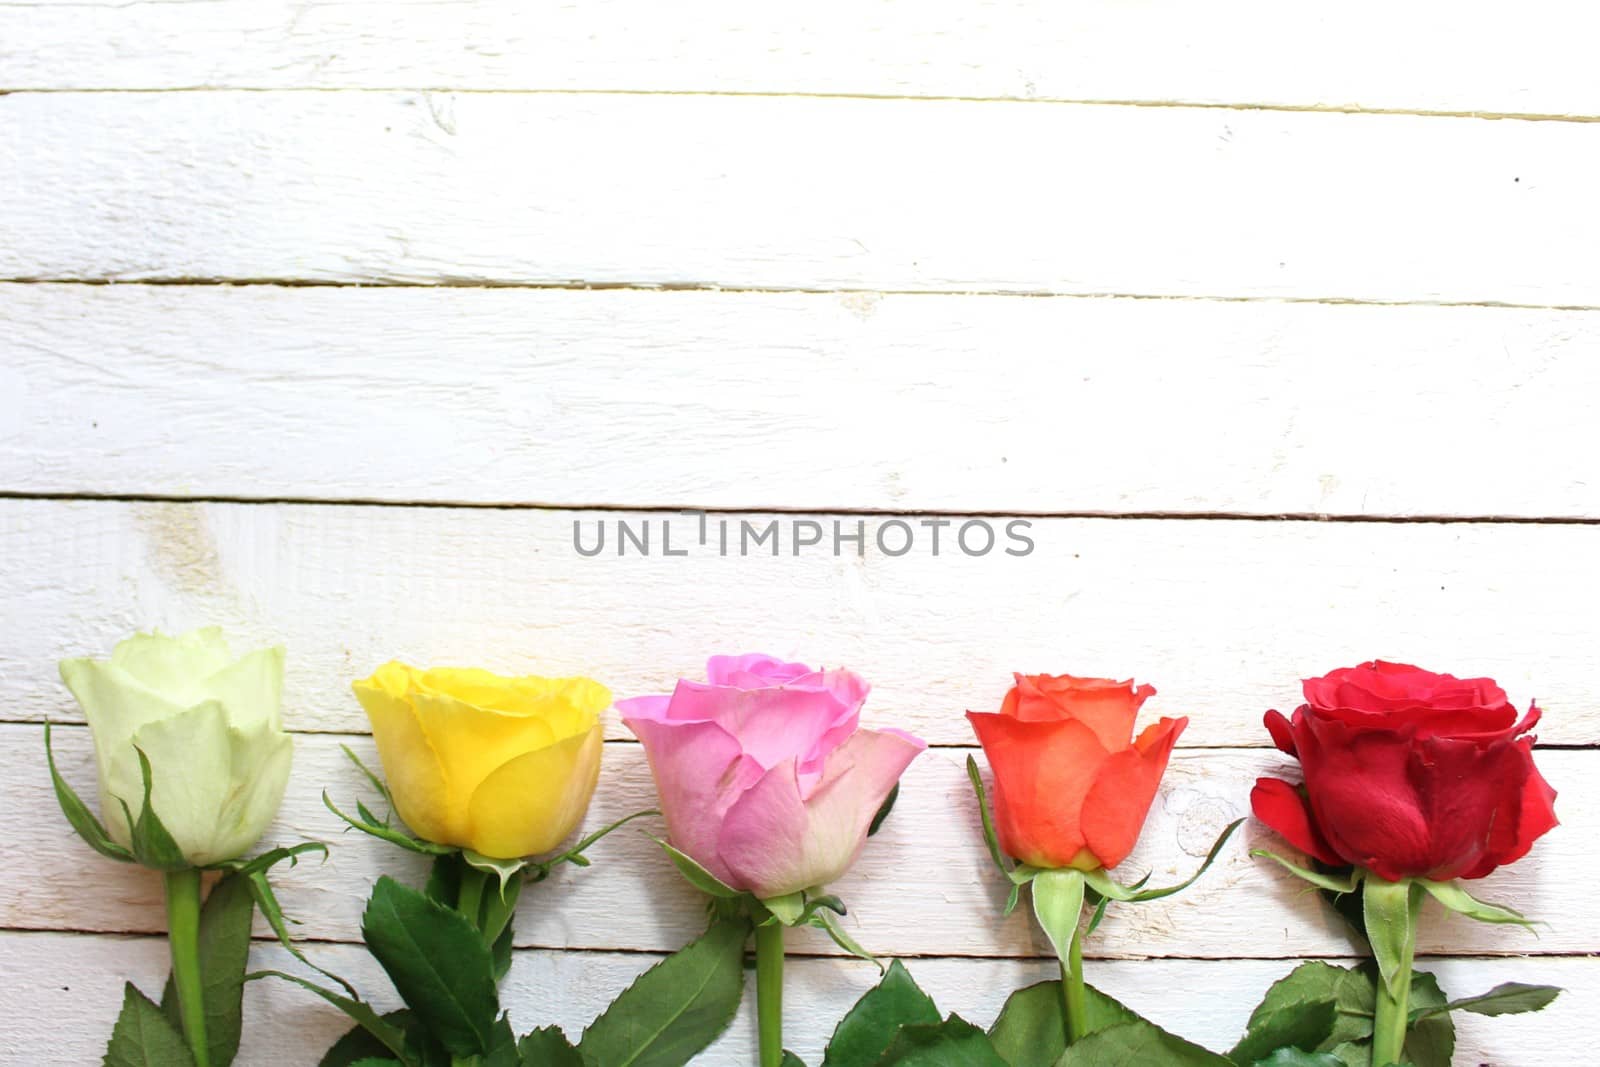 The picture shows a border with colorful roses.